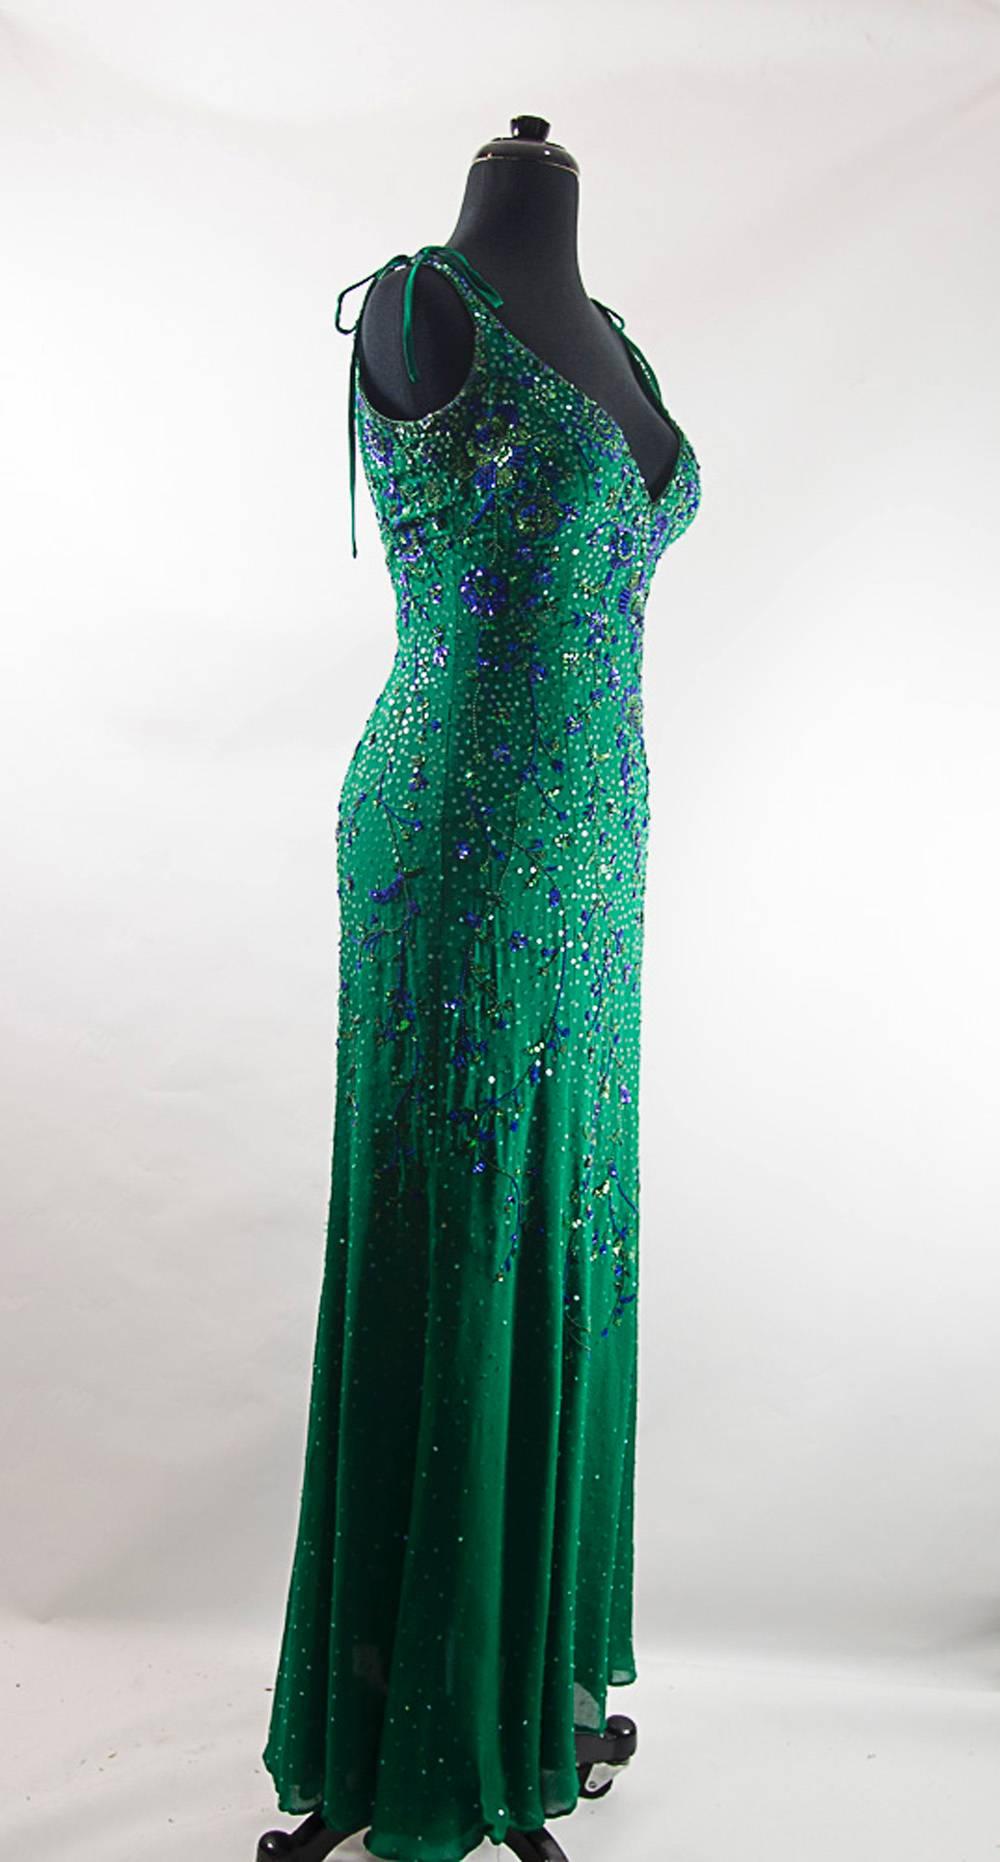 Stunning Escada dark green mermaid gown. Silk chiffon hand beaded and embroidered . Adjustable Tie shoulders. Sweetheart neckline Pristine condition!!
Size 4
Length 54 taken from underarm bust 34